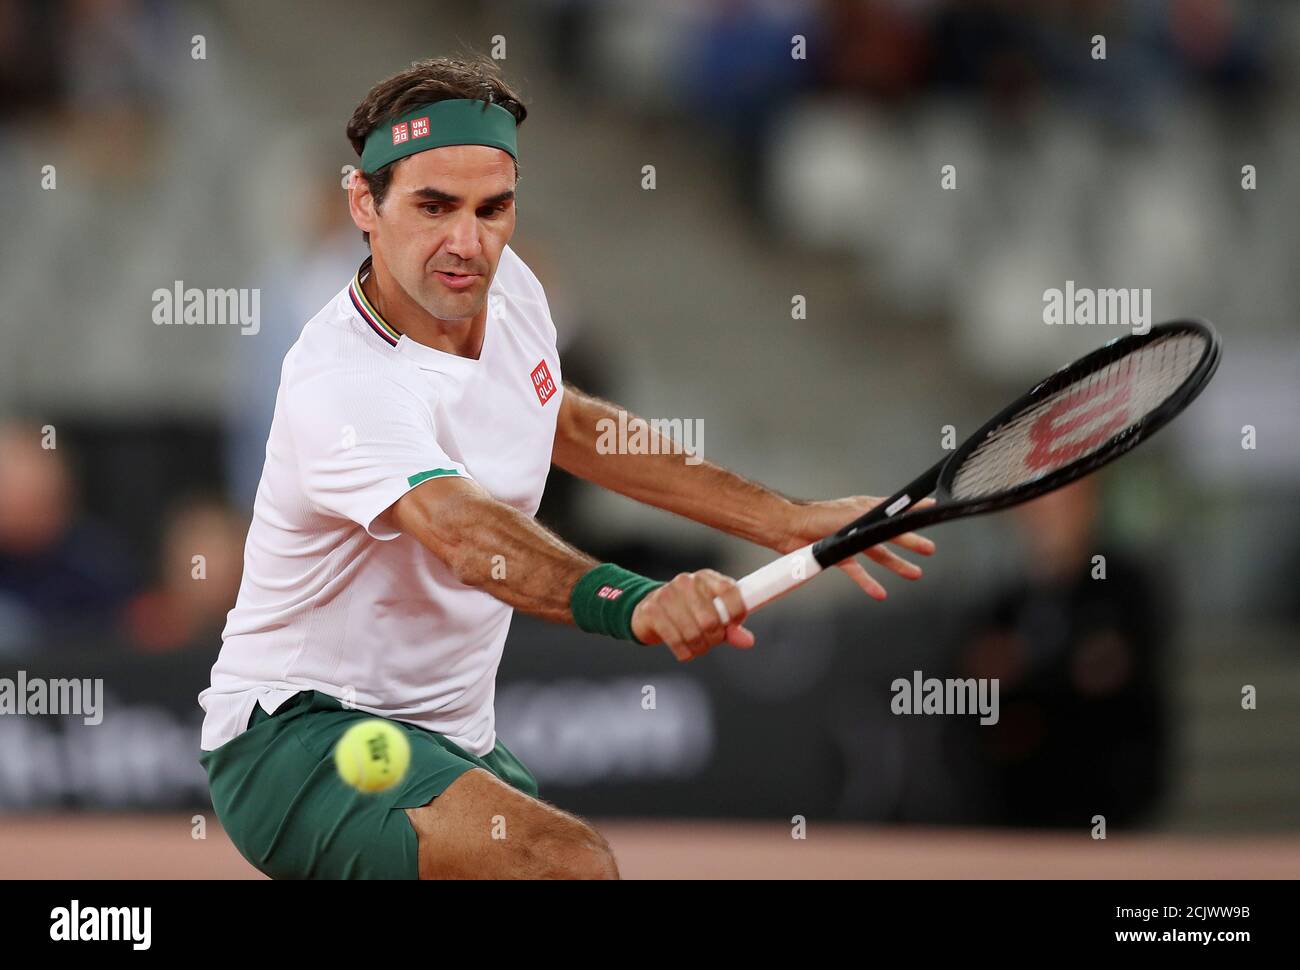 Tennis - "The Match In Africa" Exhibition Match - Cape Town Stadium, Cape  Town, South Africa - February 7,